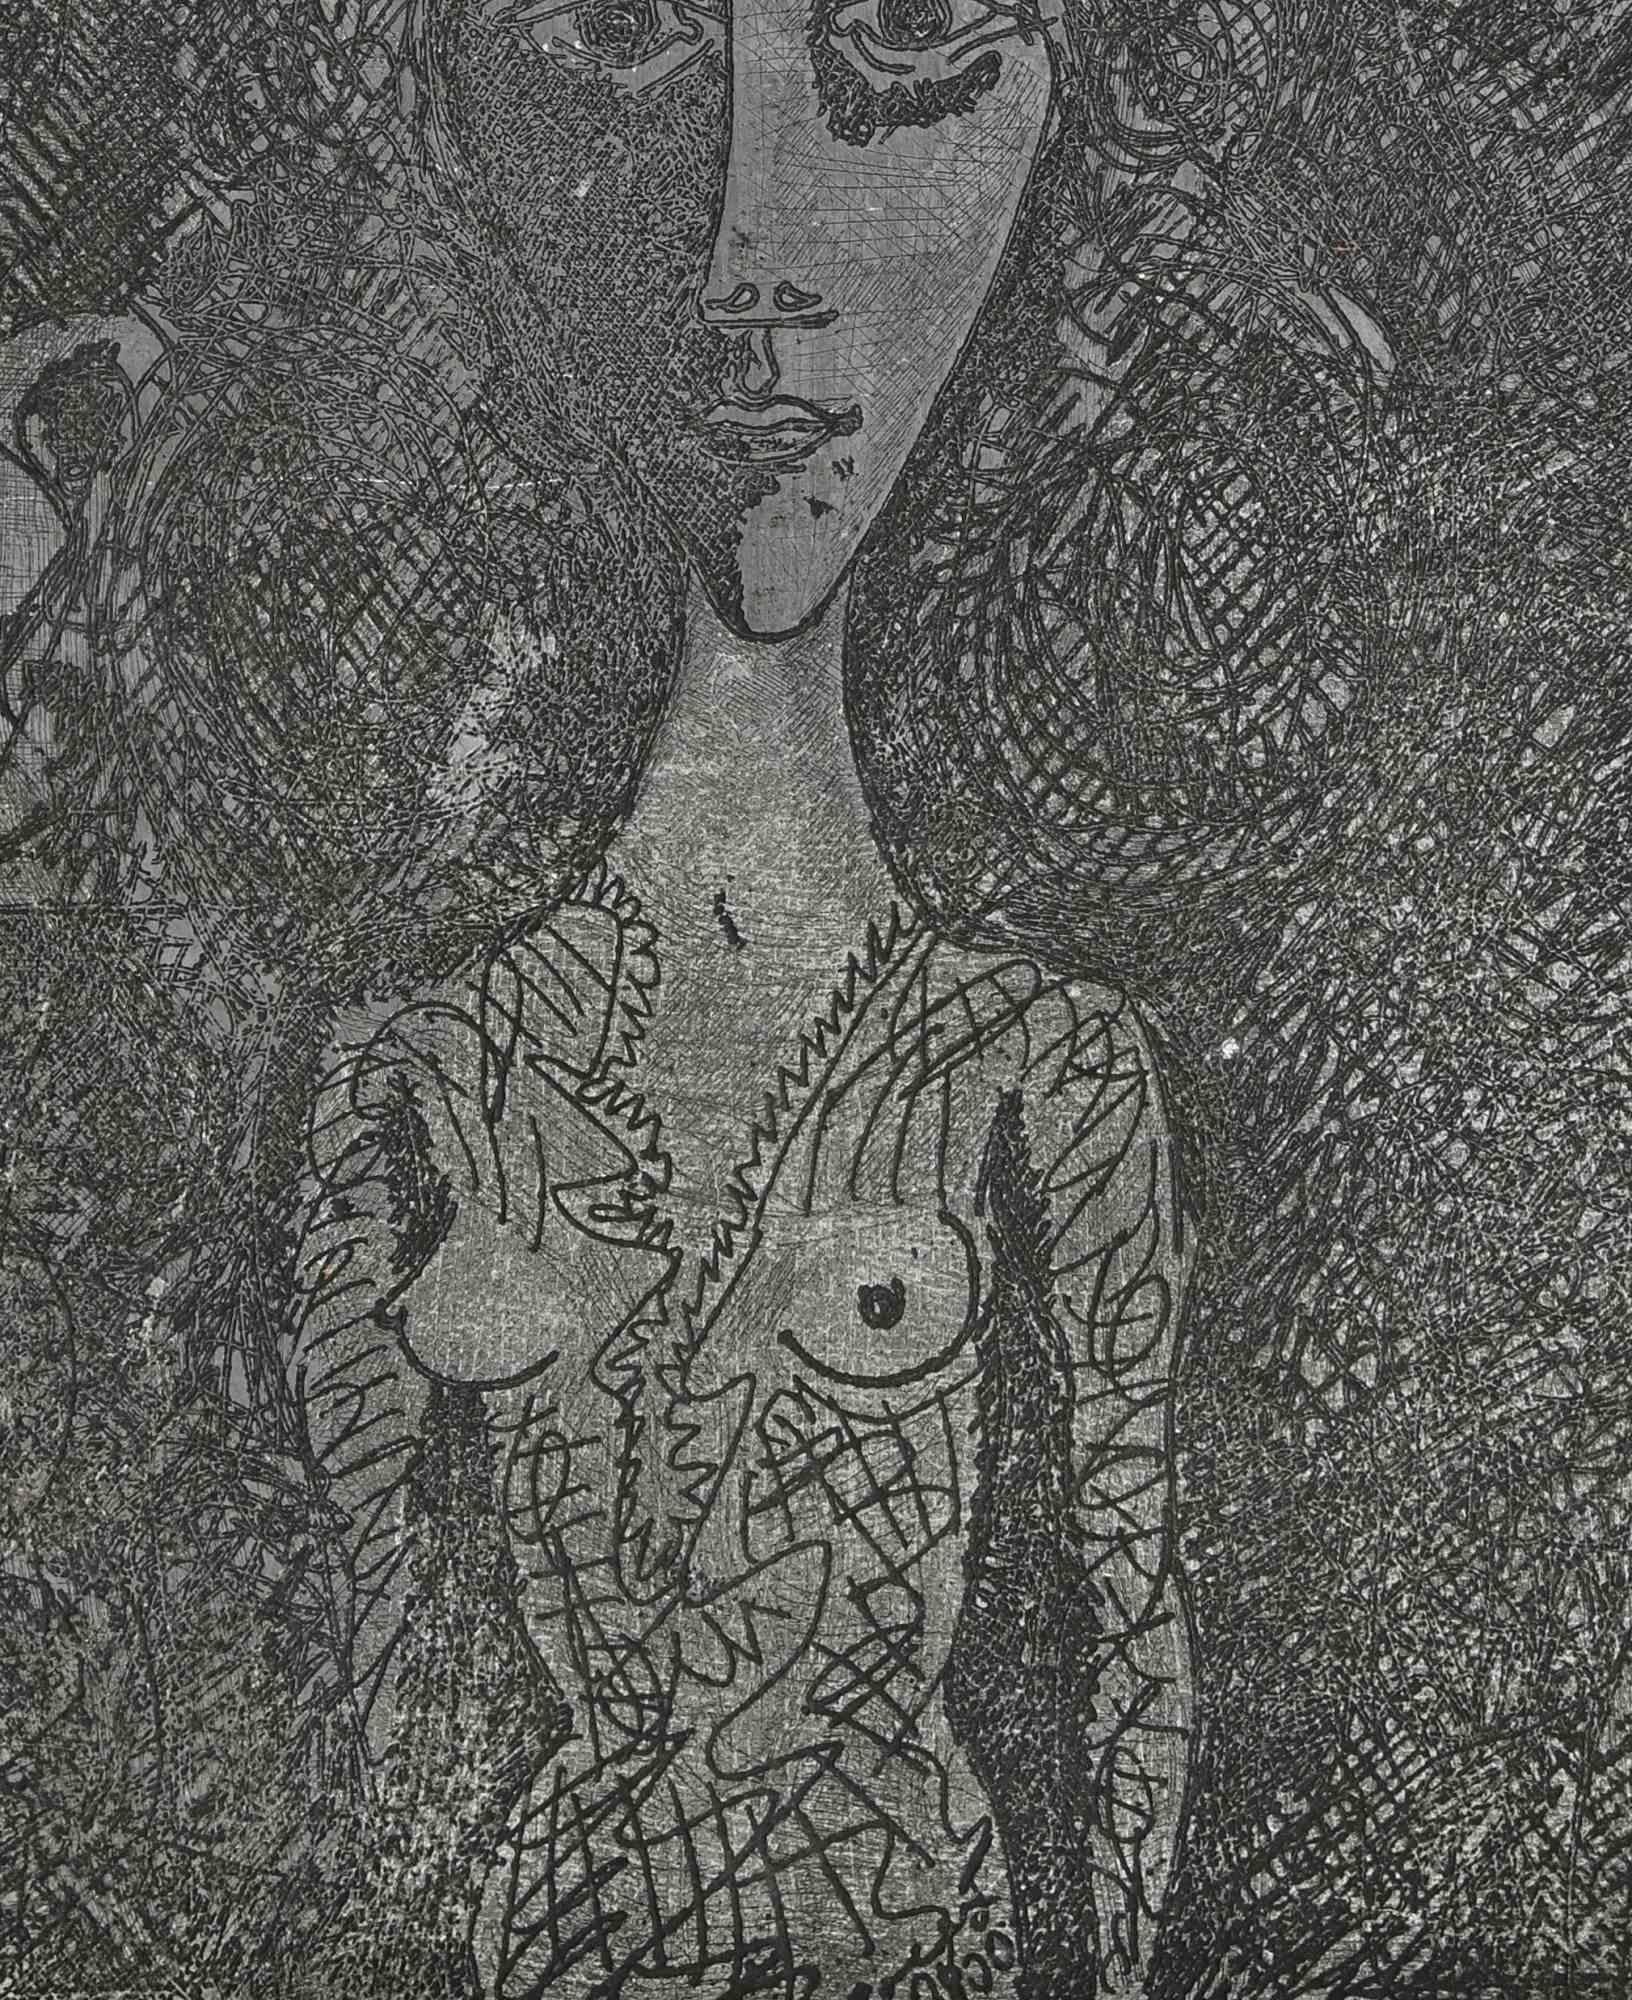 Portrait of a woman is an original artwork realized by Gianpaolo Berto in the 1980s. 

Engraved metal plate.

Gianpaolo Berto : A native of Adria, an eclectic and multifaceted artist, in 1956 at the age of sixteen, struck by his precocious